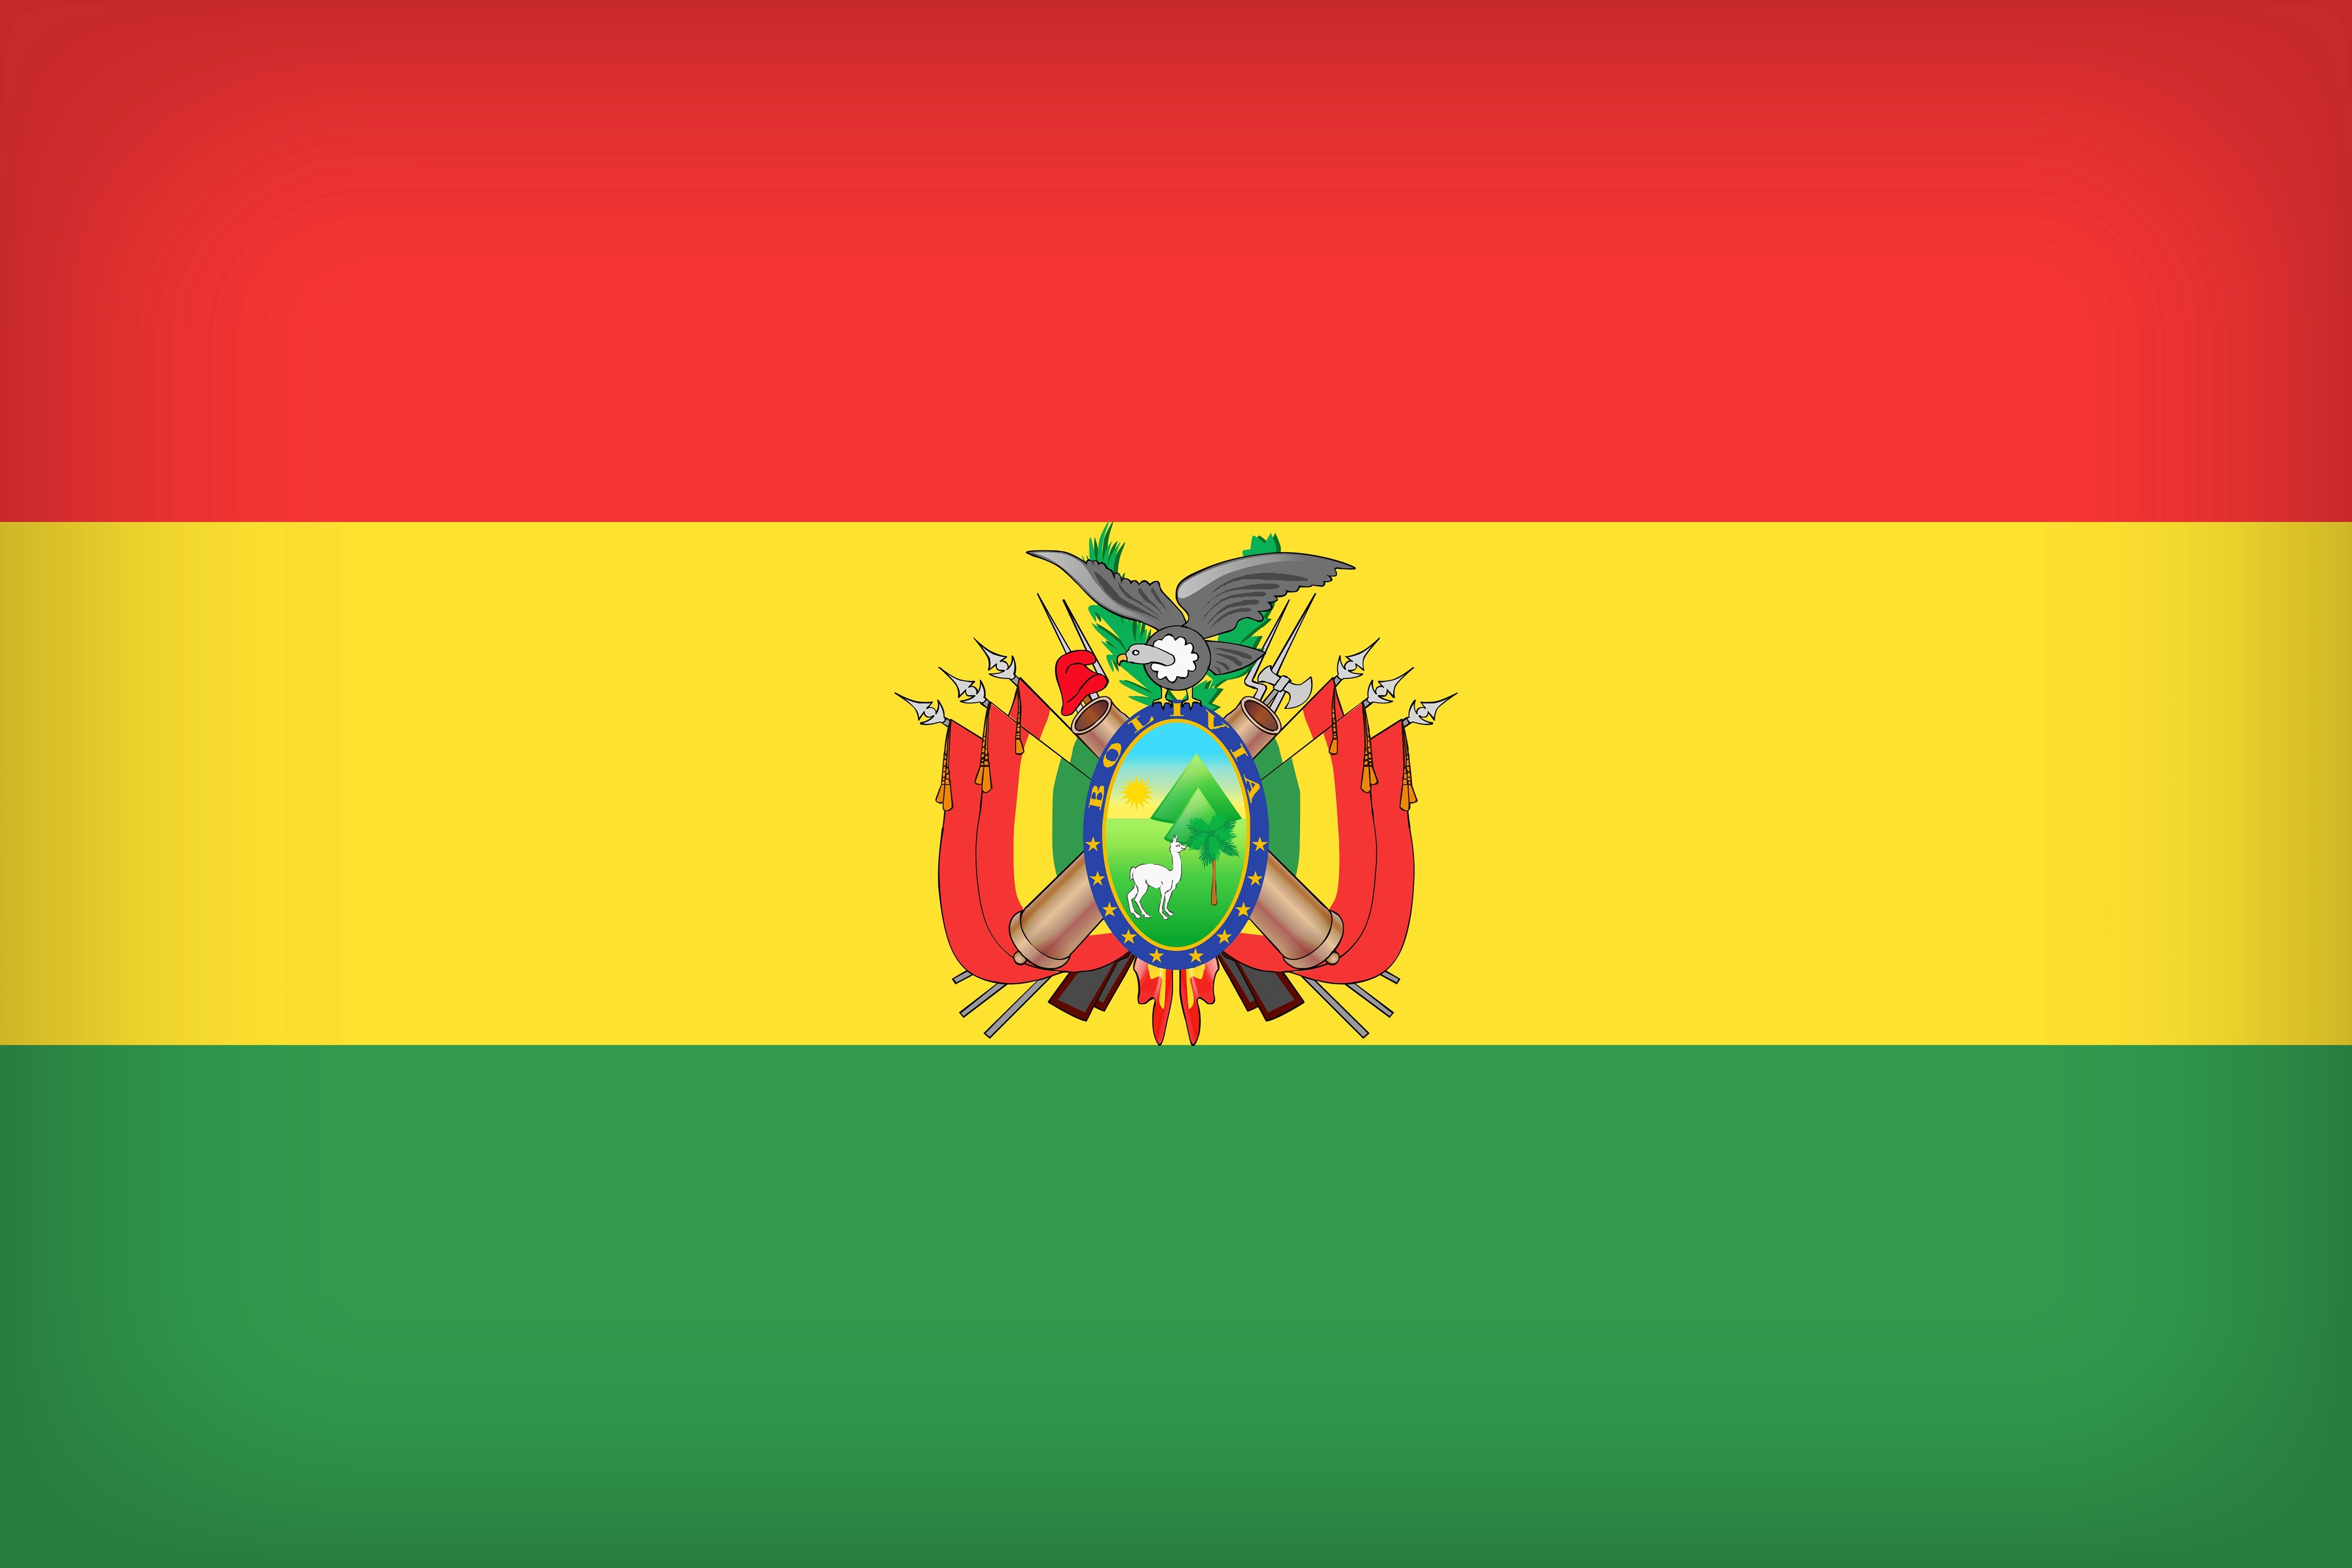 The National Flag of Bolivia by Paul Brennan